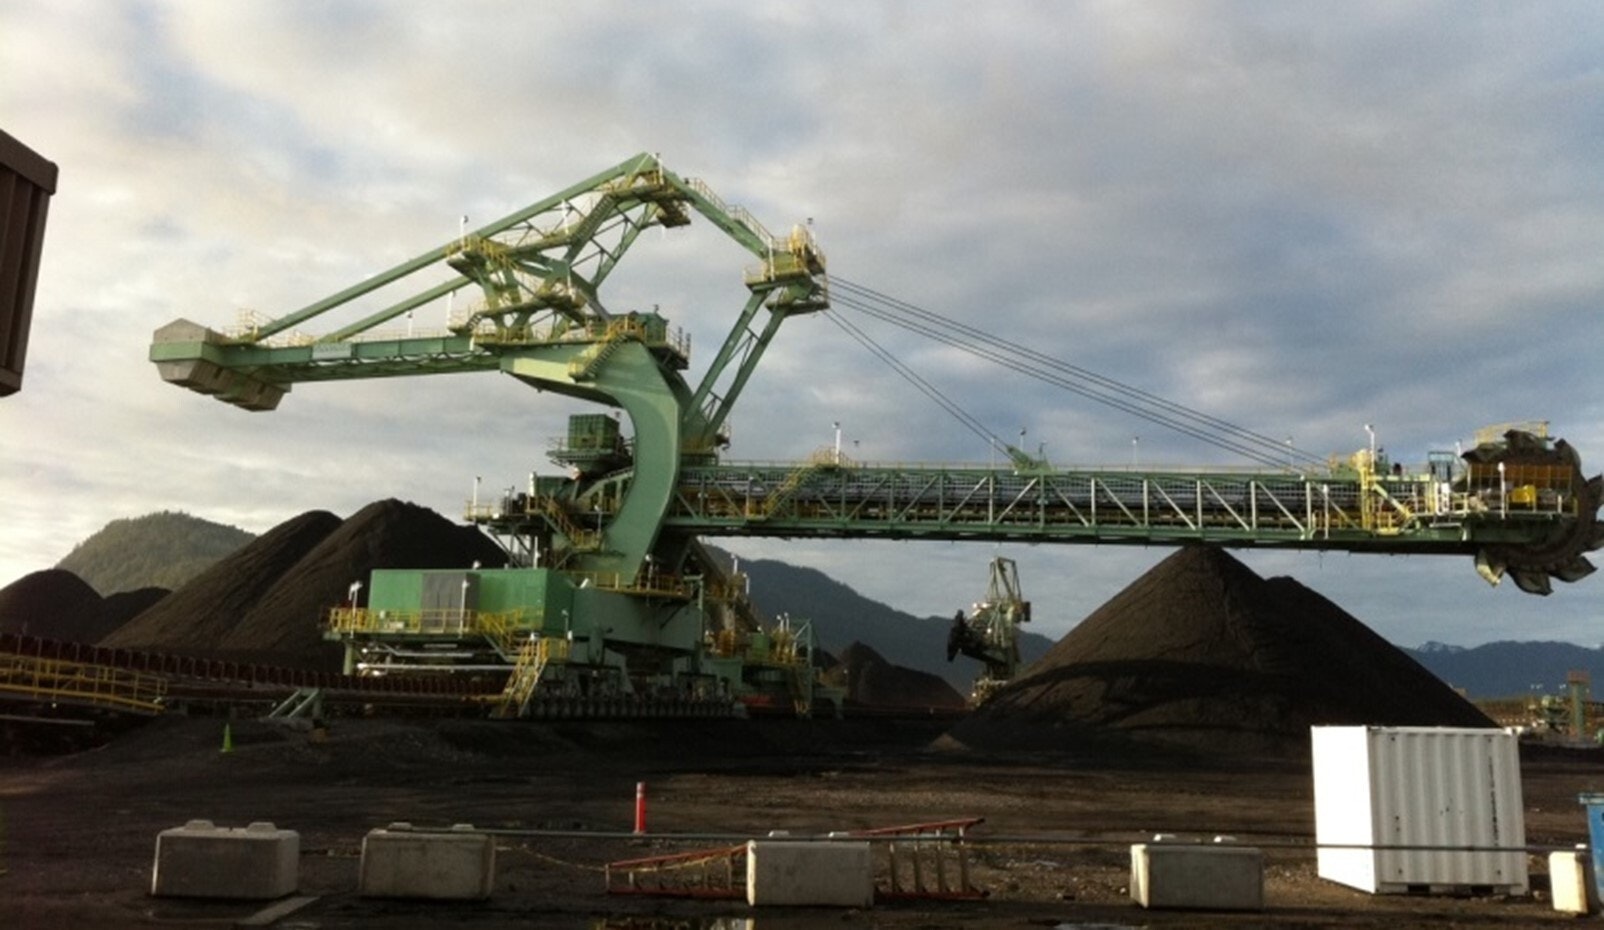 Cloud-Based Monitoring Solution Powers Creation of Early Warning System at Major Coal Terminal